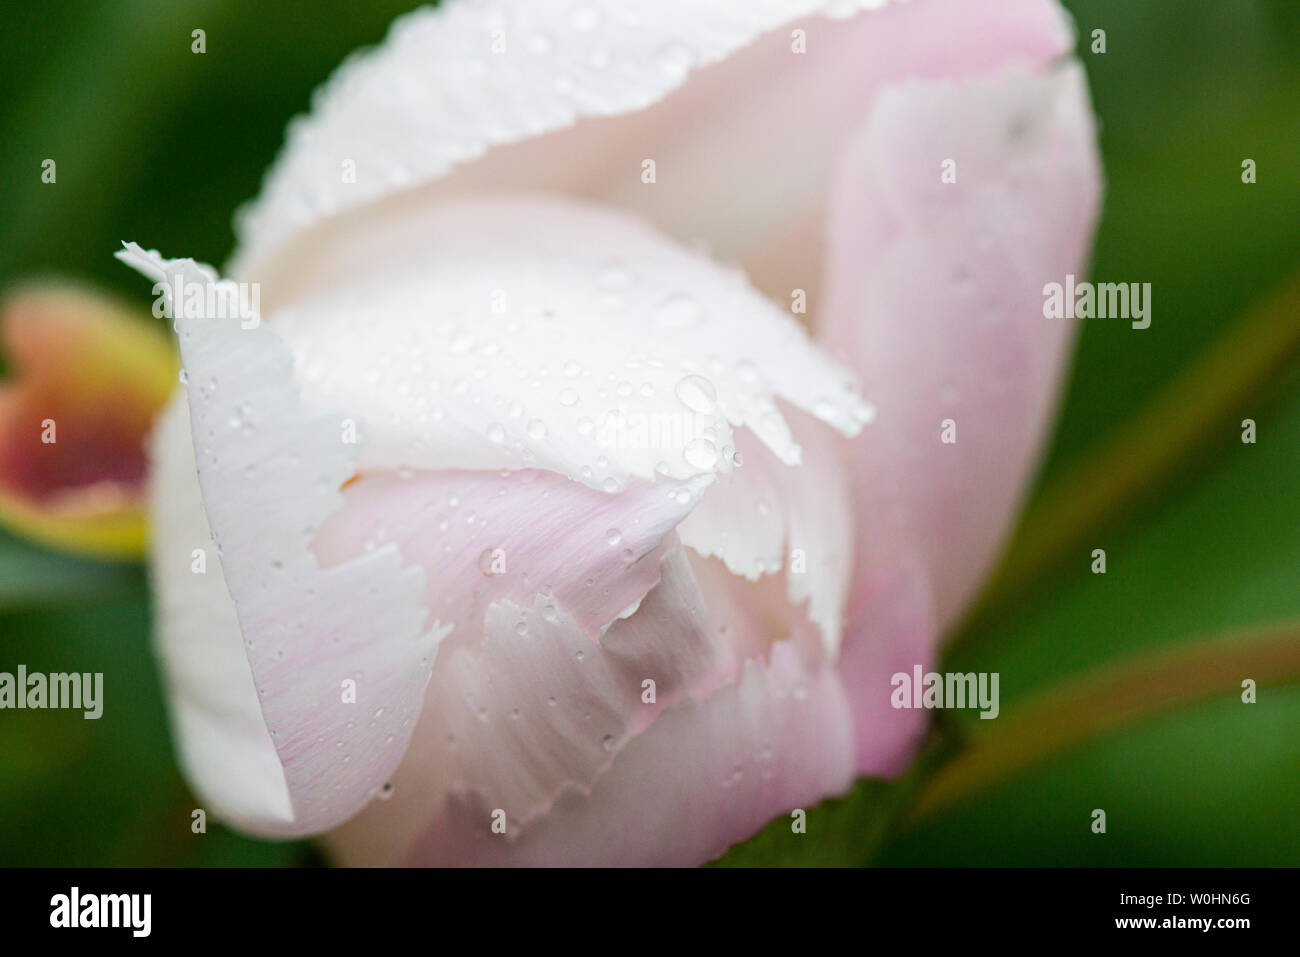 Water droplets on a pale pink rose bud Stock Photo